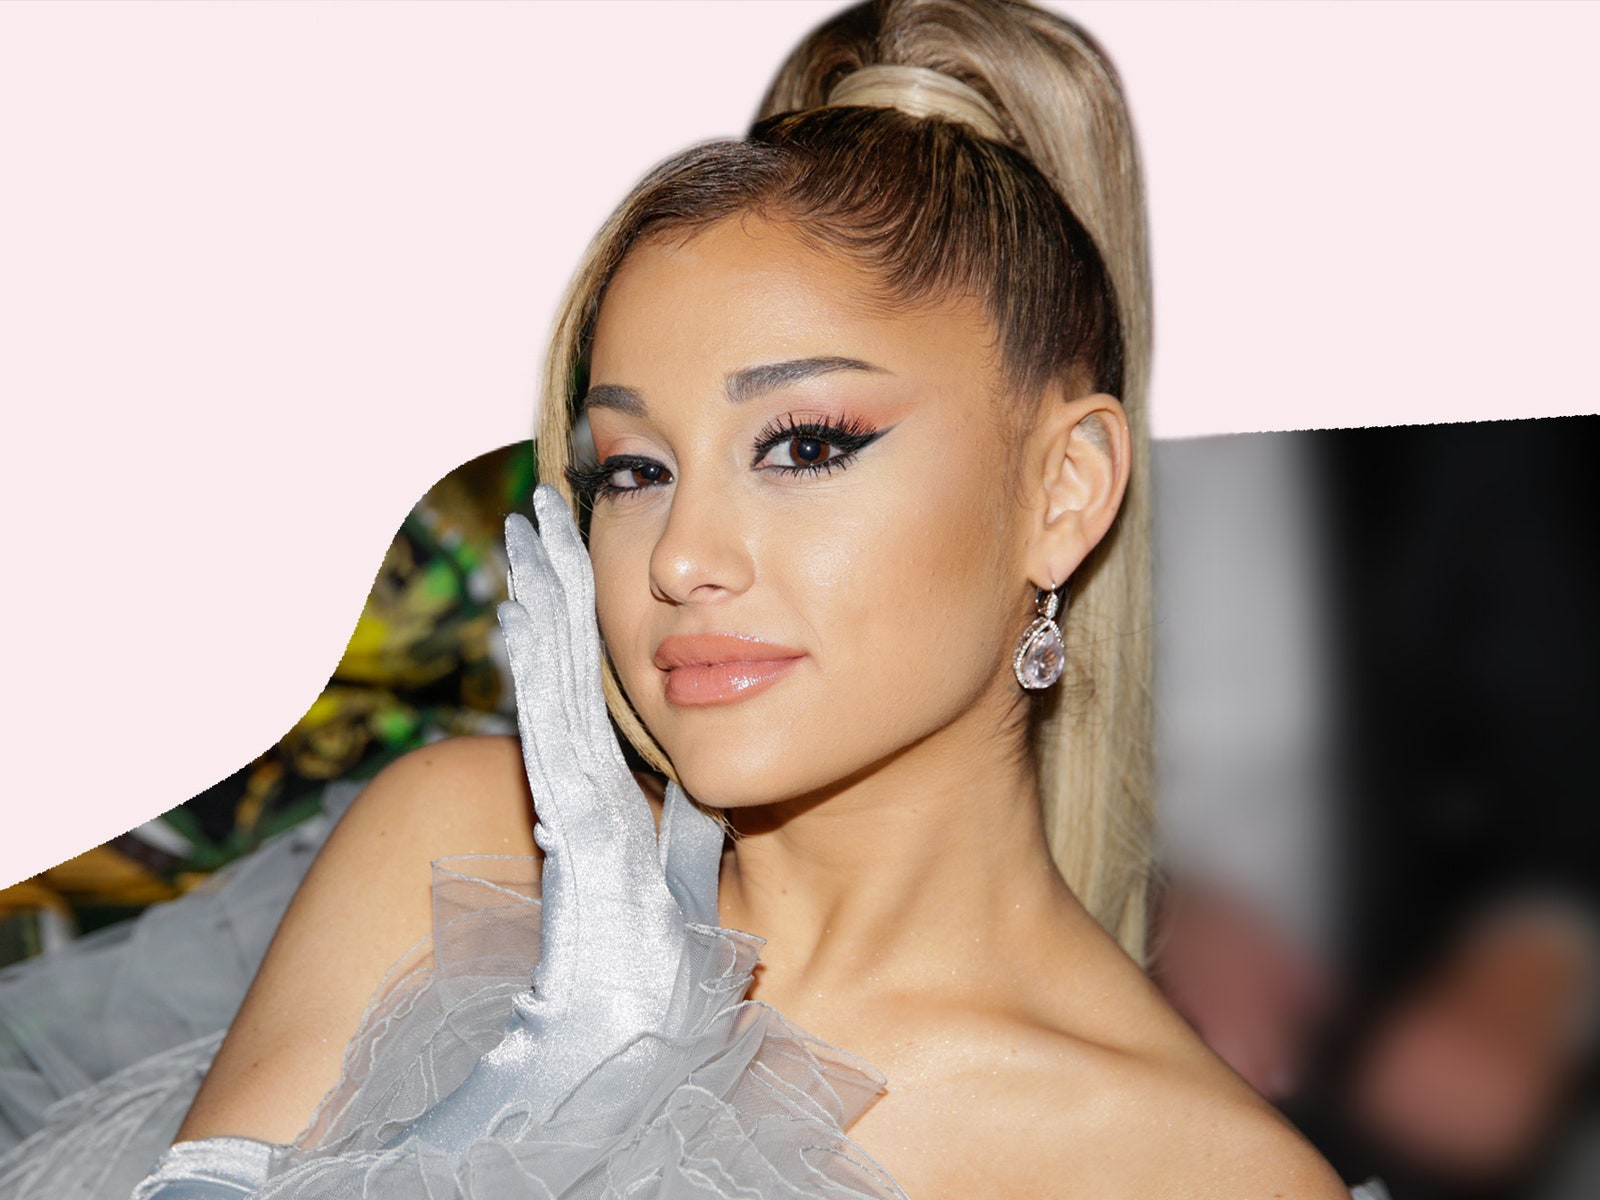 How to get Ariana Grande's epic white eyeshadow look